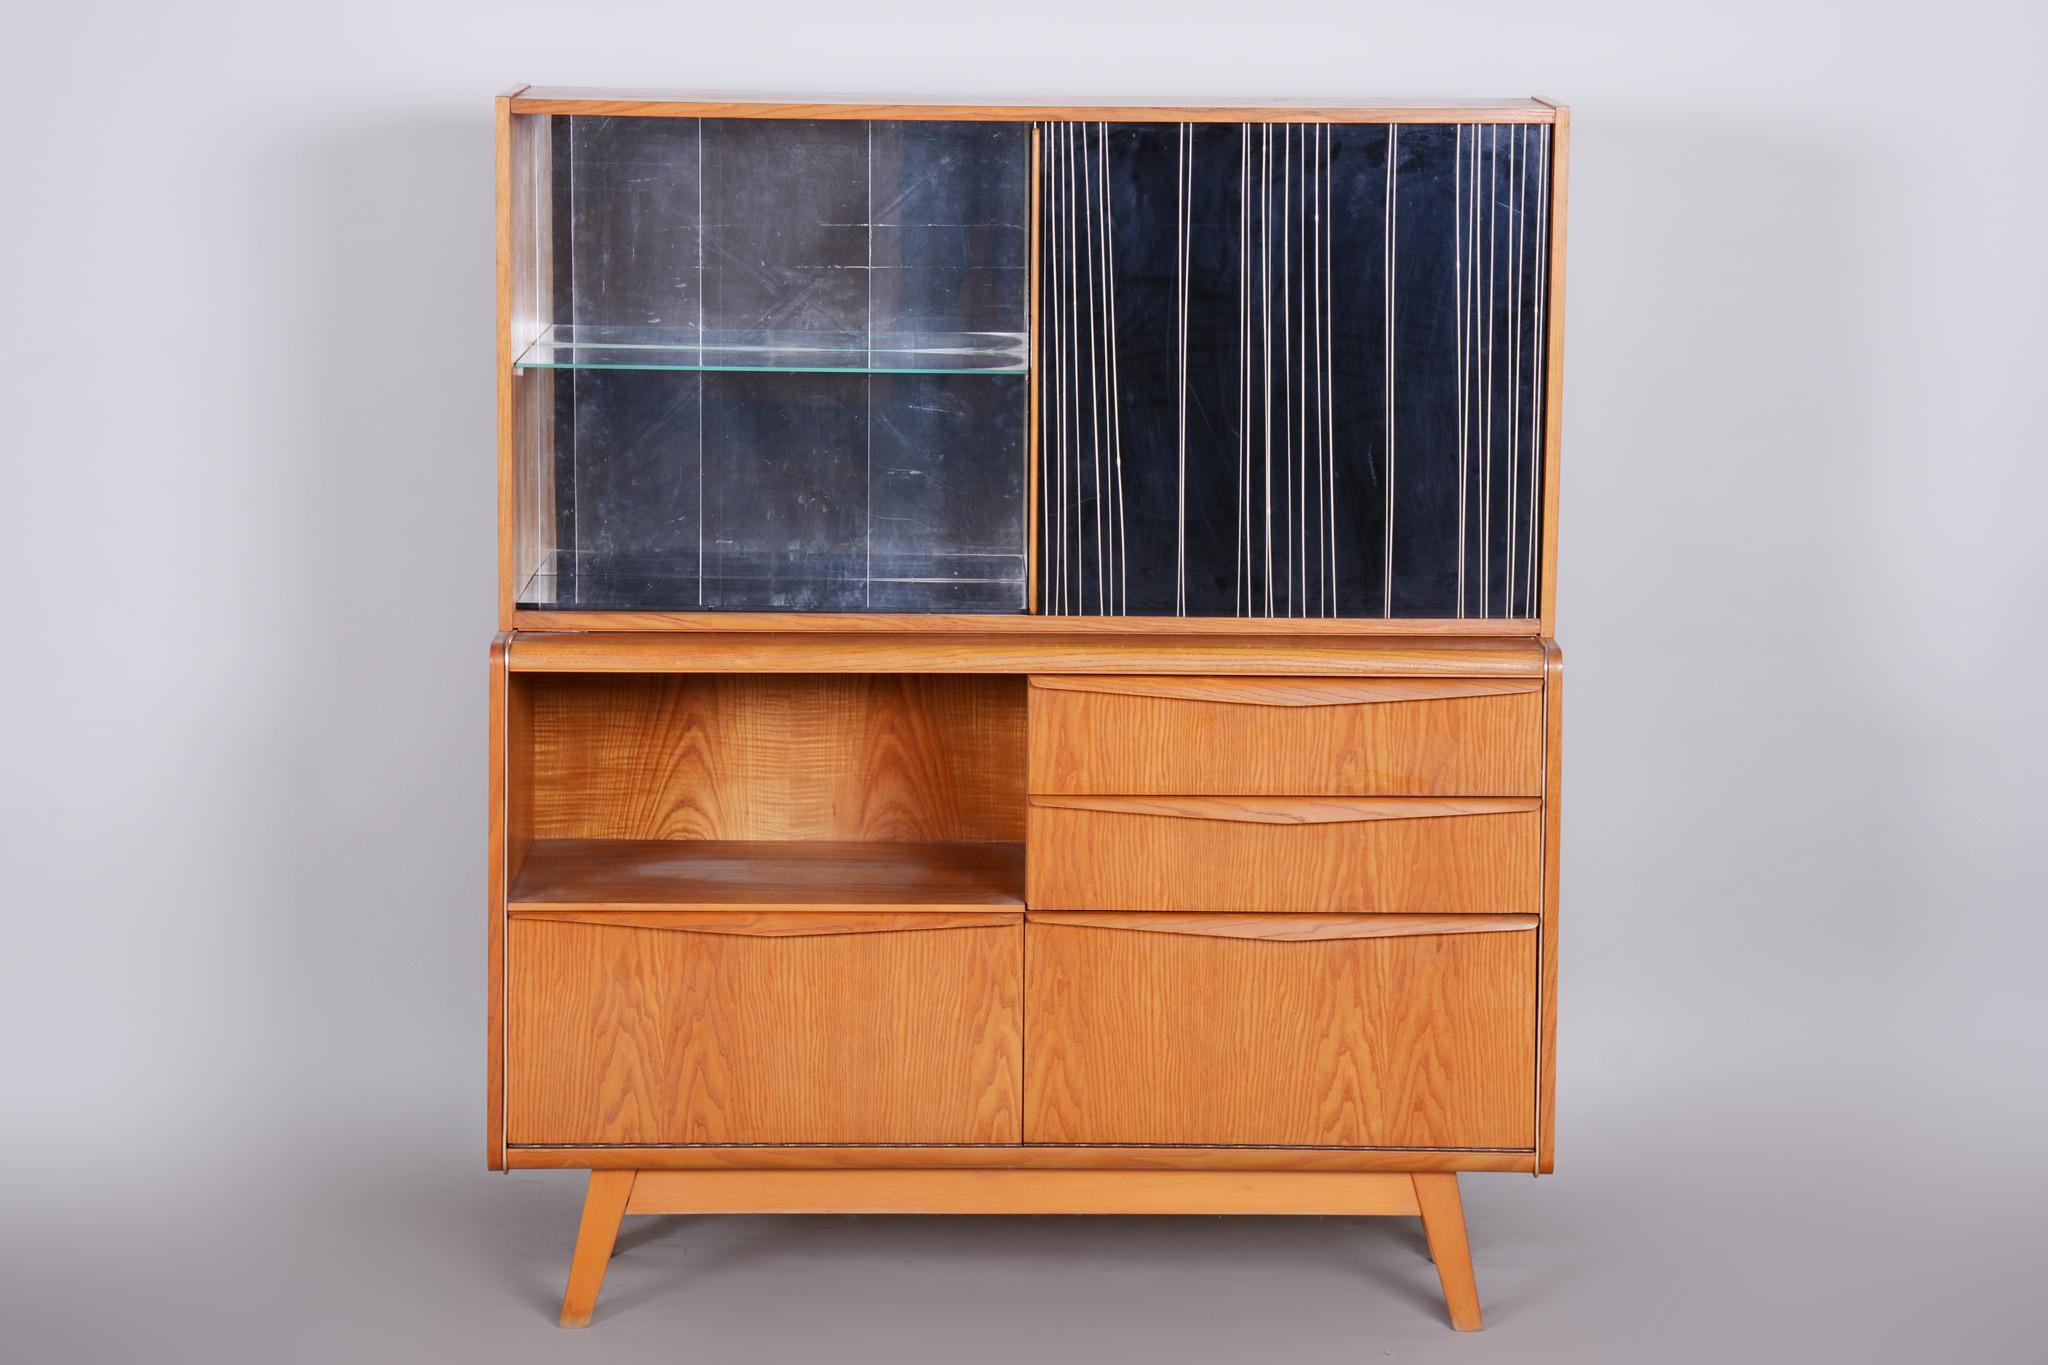 Czech mid-century sideboard.

Material: Ash
Original very well preserved condition

We guarantee safe a the cheapest air transport from Europe to the whole world within 7 days.
The price is the same as for ship transport but delivery time is